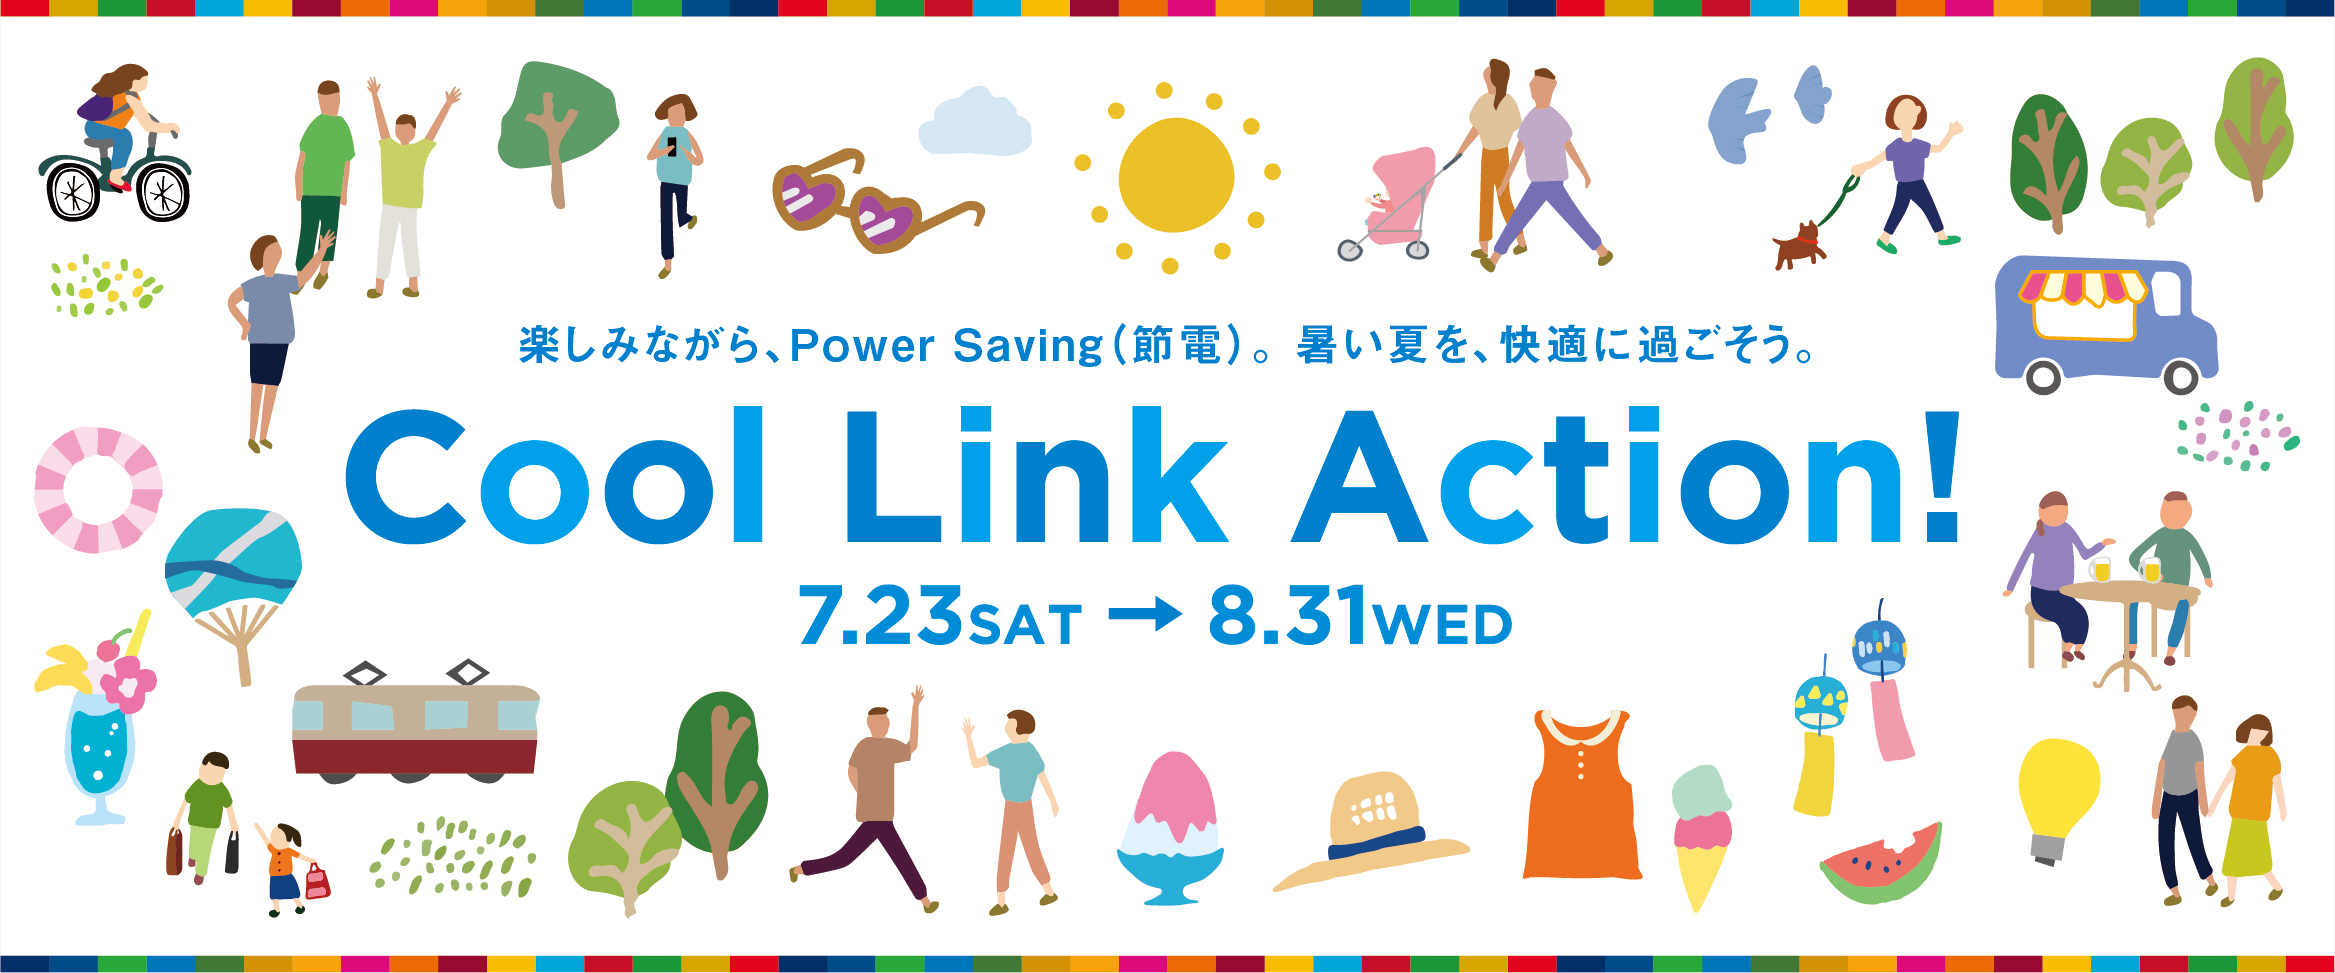 Cool Link Actionの画像